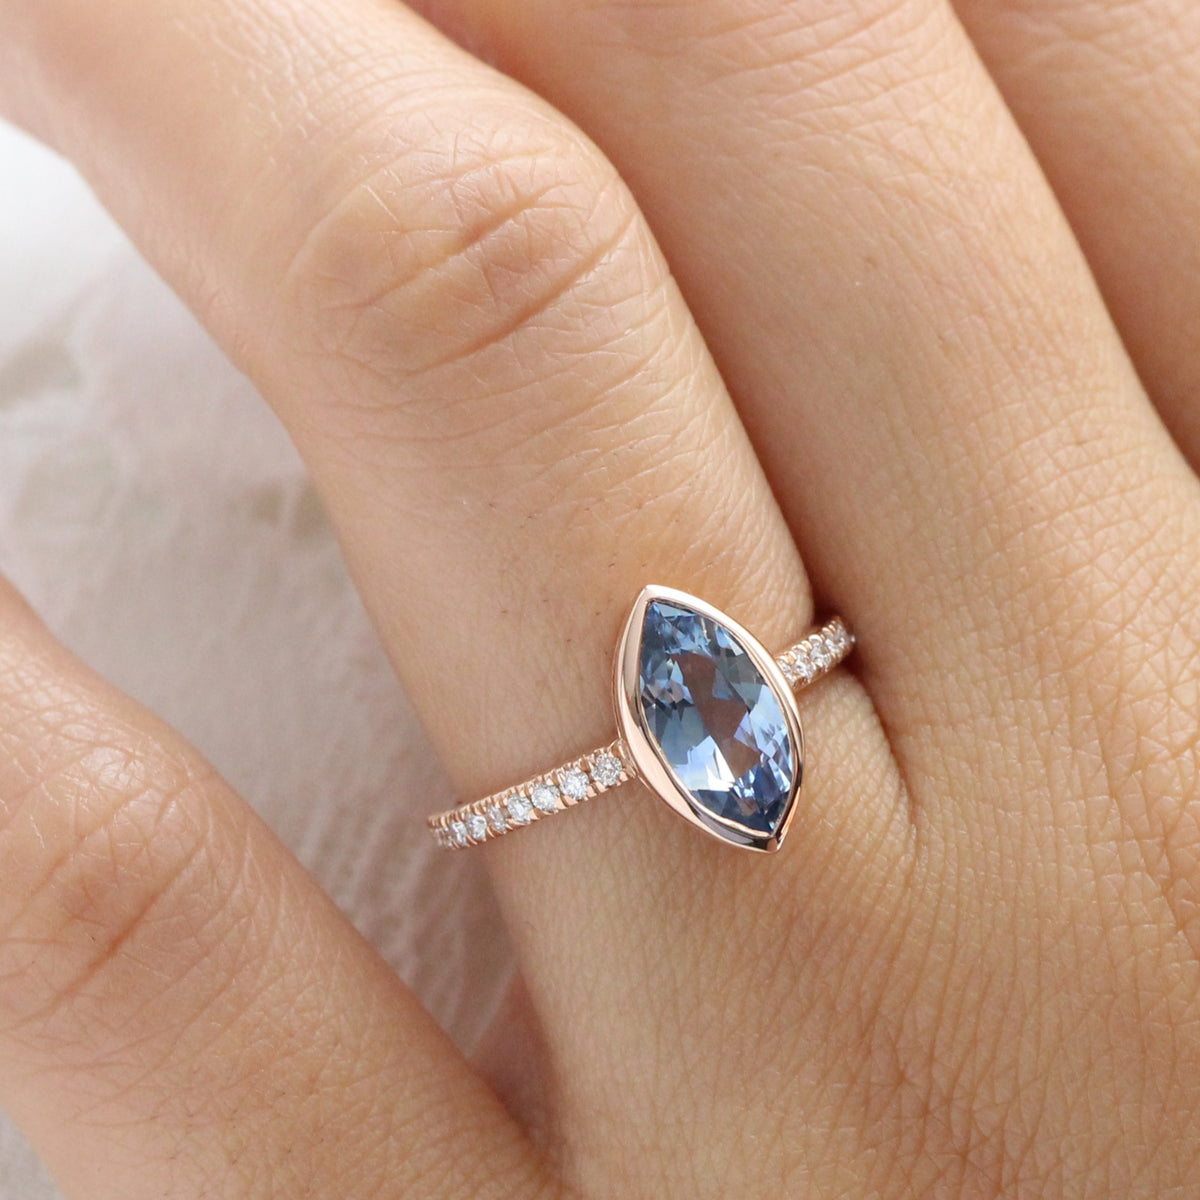 Marquise teal blue sapphire ring rose gold bezel solitaire pave diamond band la more design jewelry